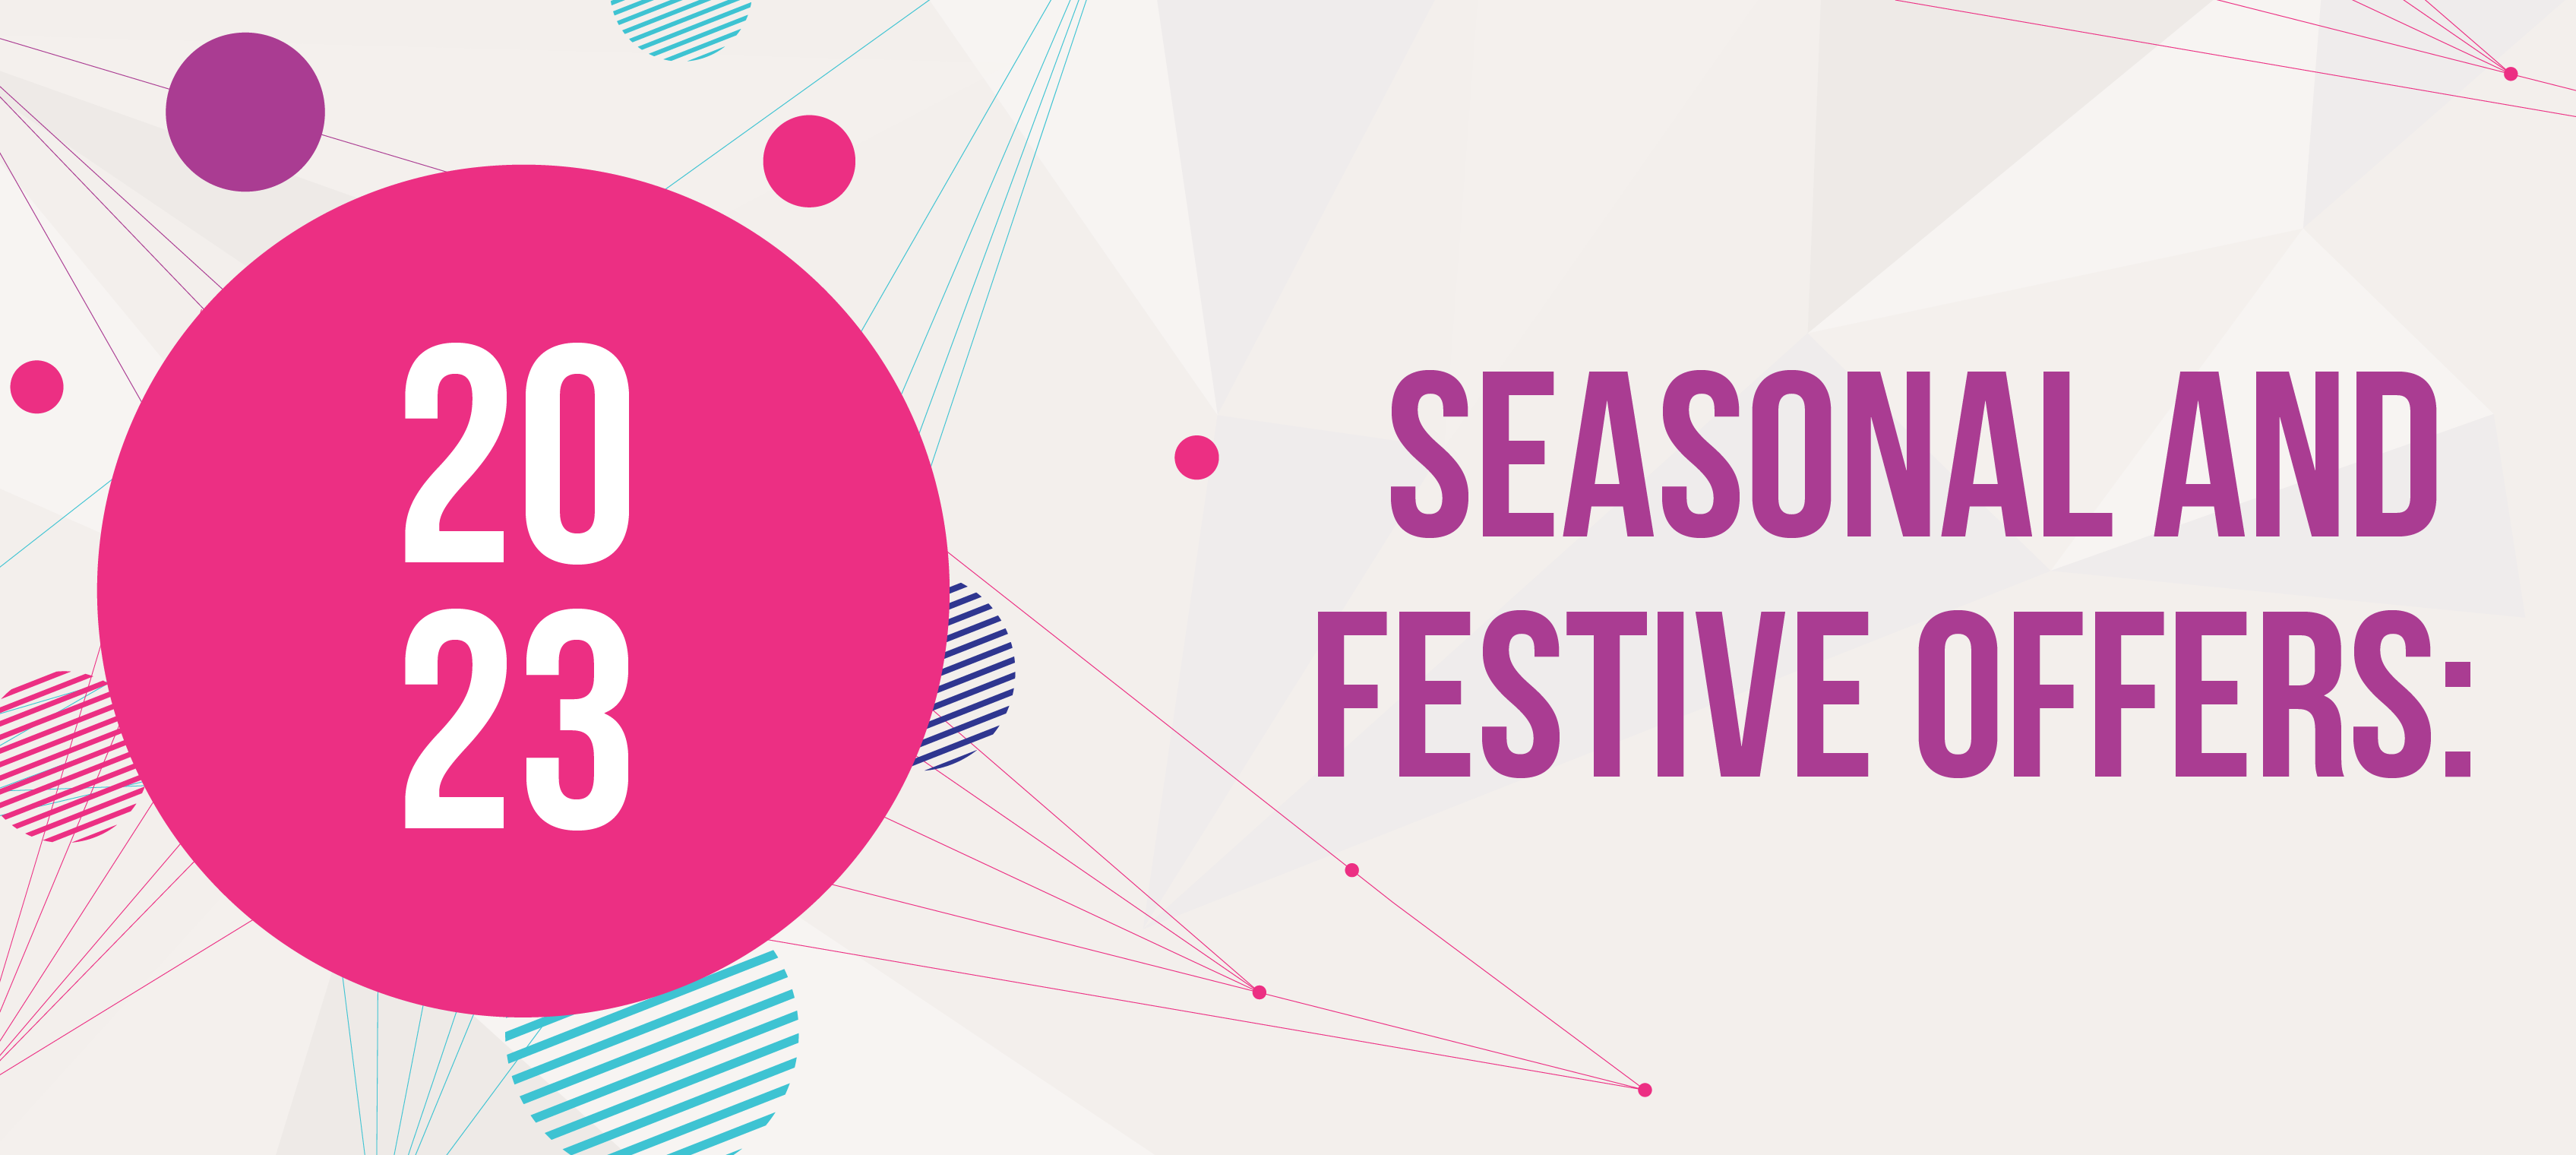 Save in Seasonal and Festival Offers